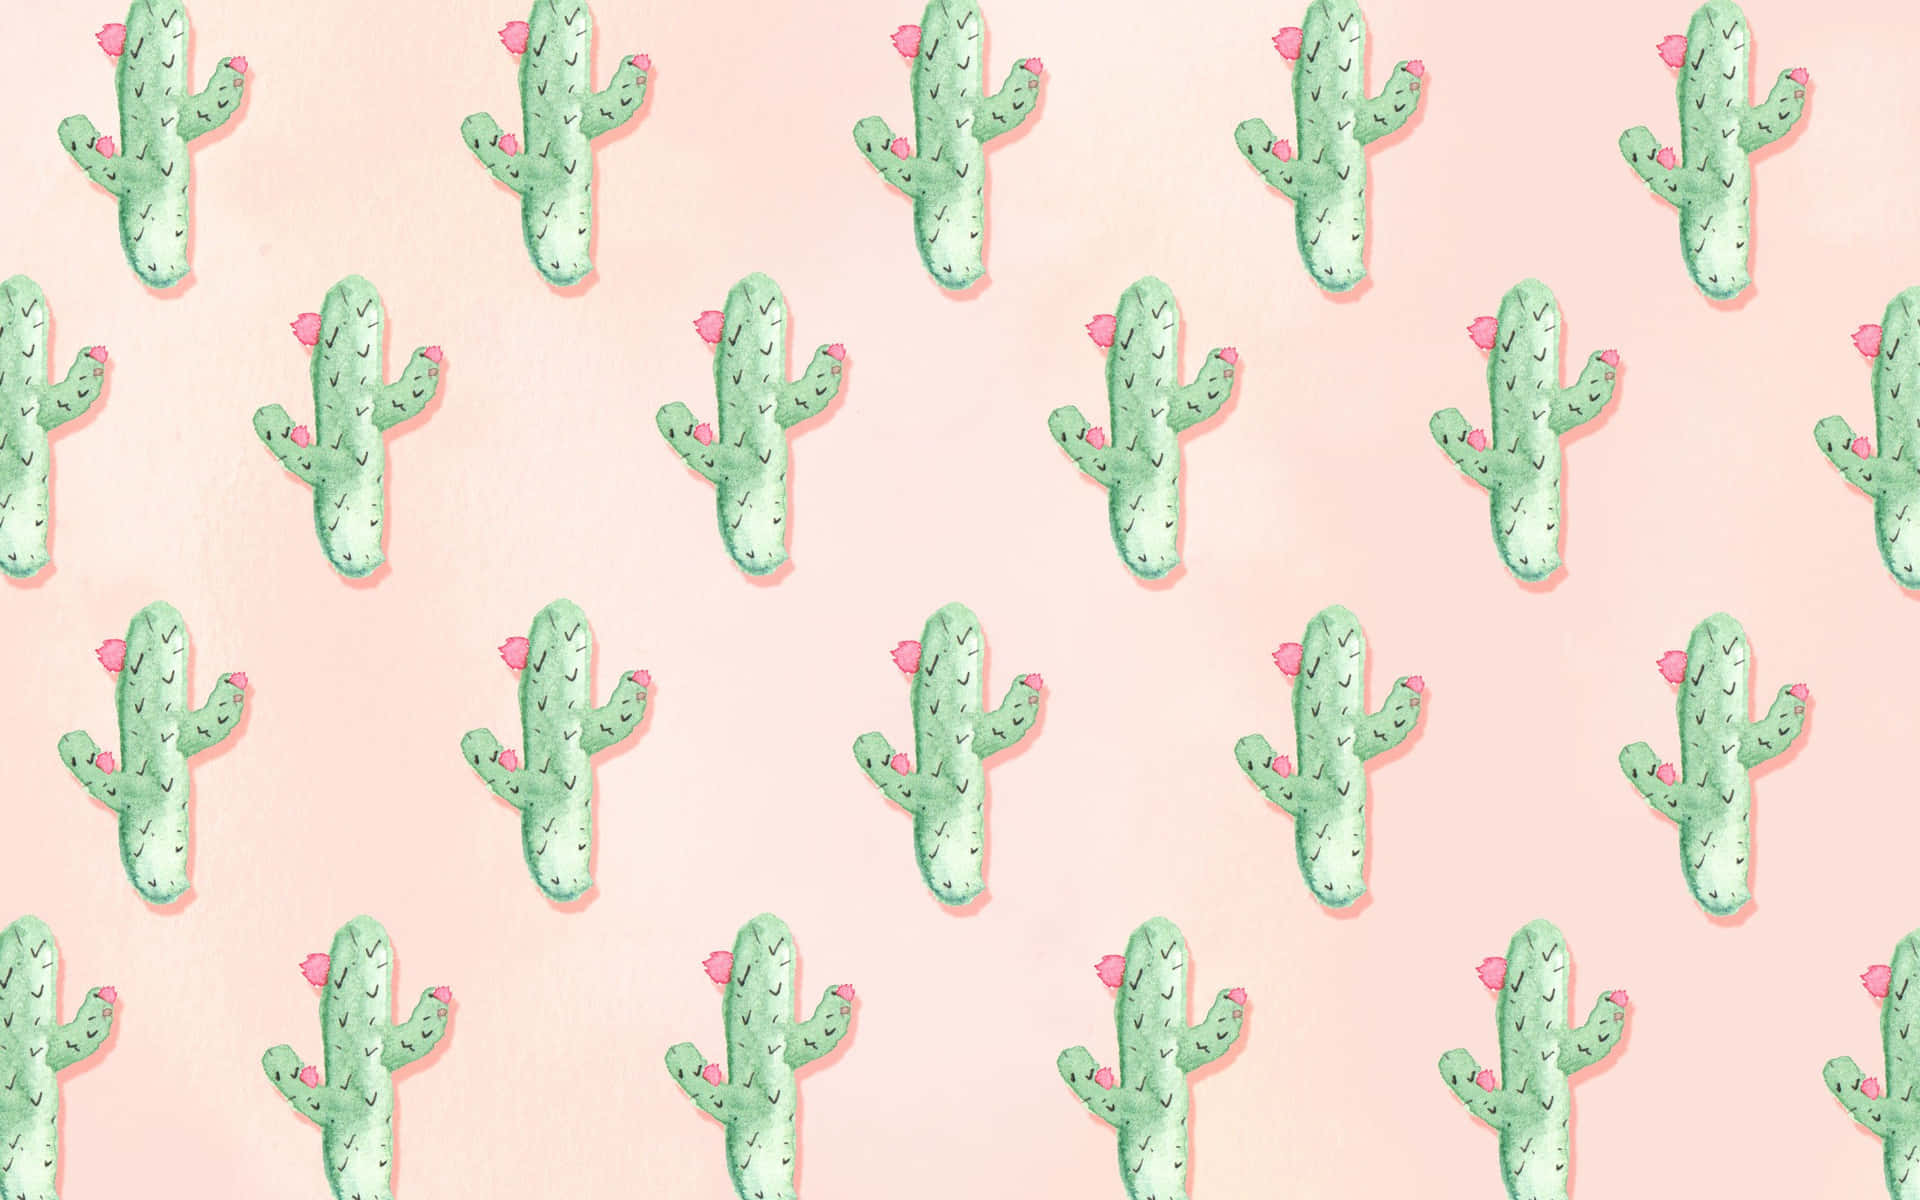 Brighten up your home with a cute cactus! Wallpaper